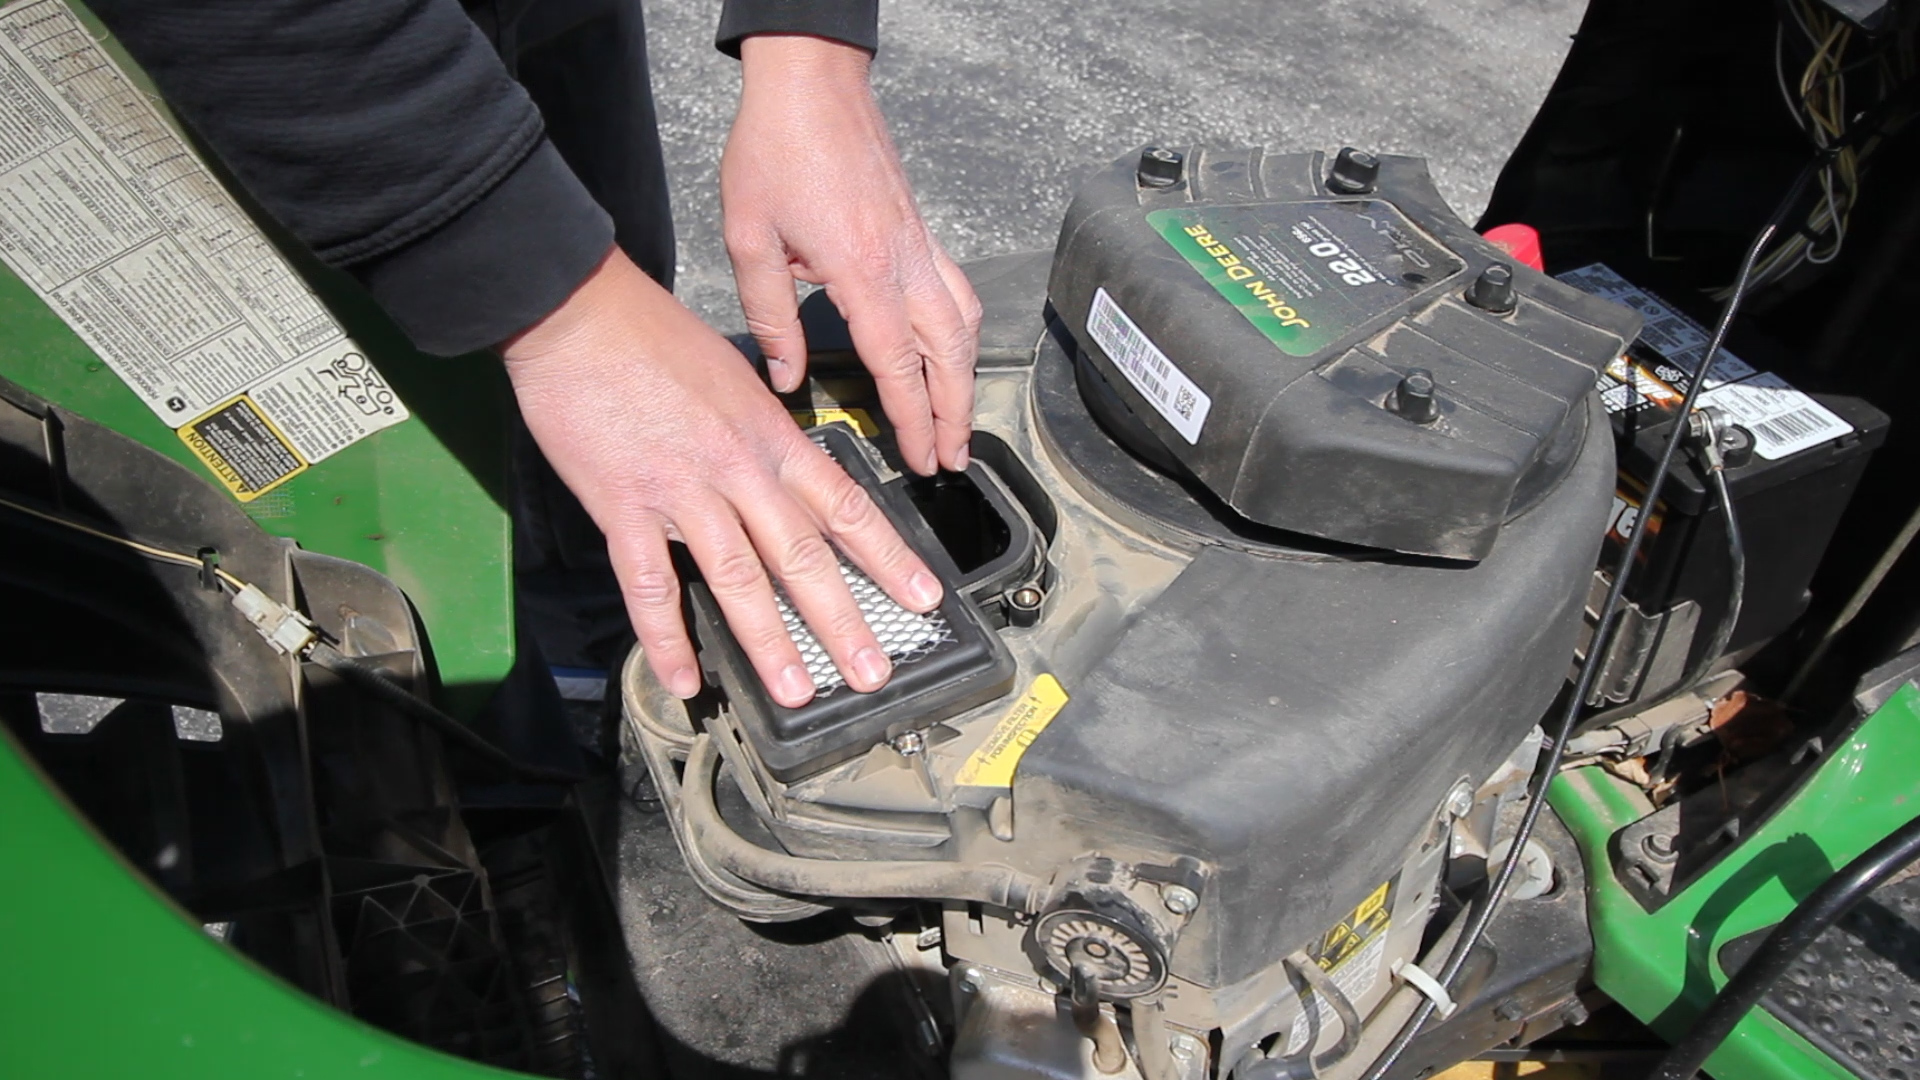 Easy to follow to-do list for all the little things you need to do for spring lawn tractor maintenance!